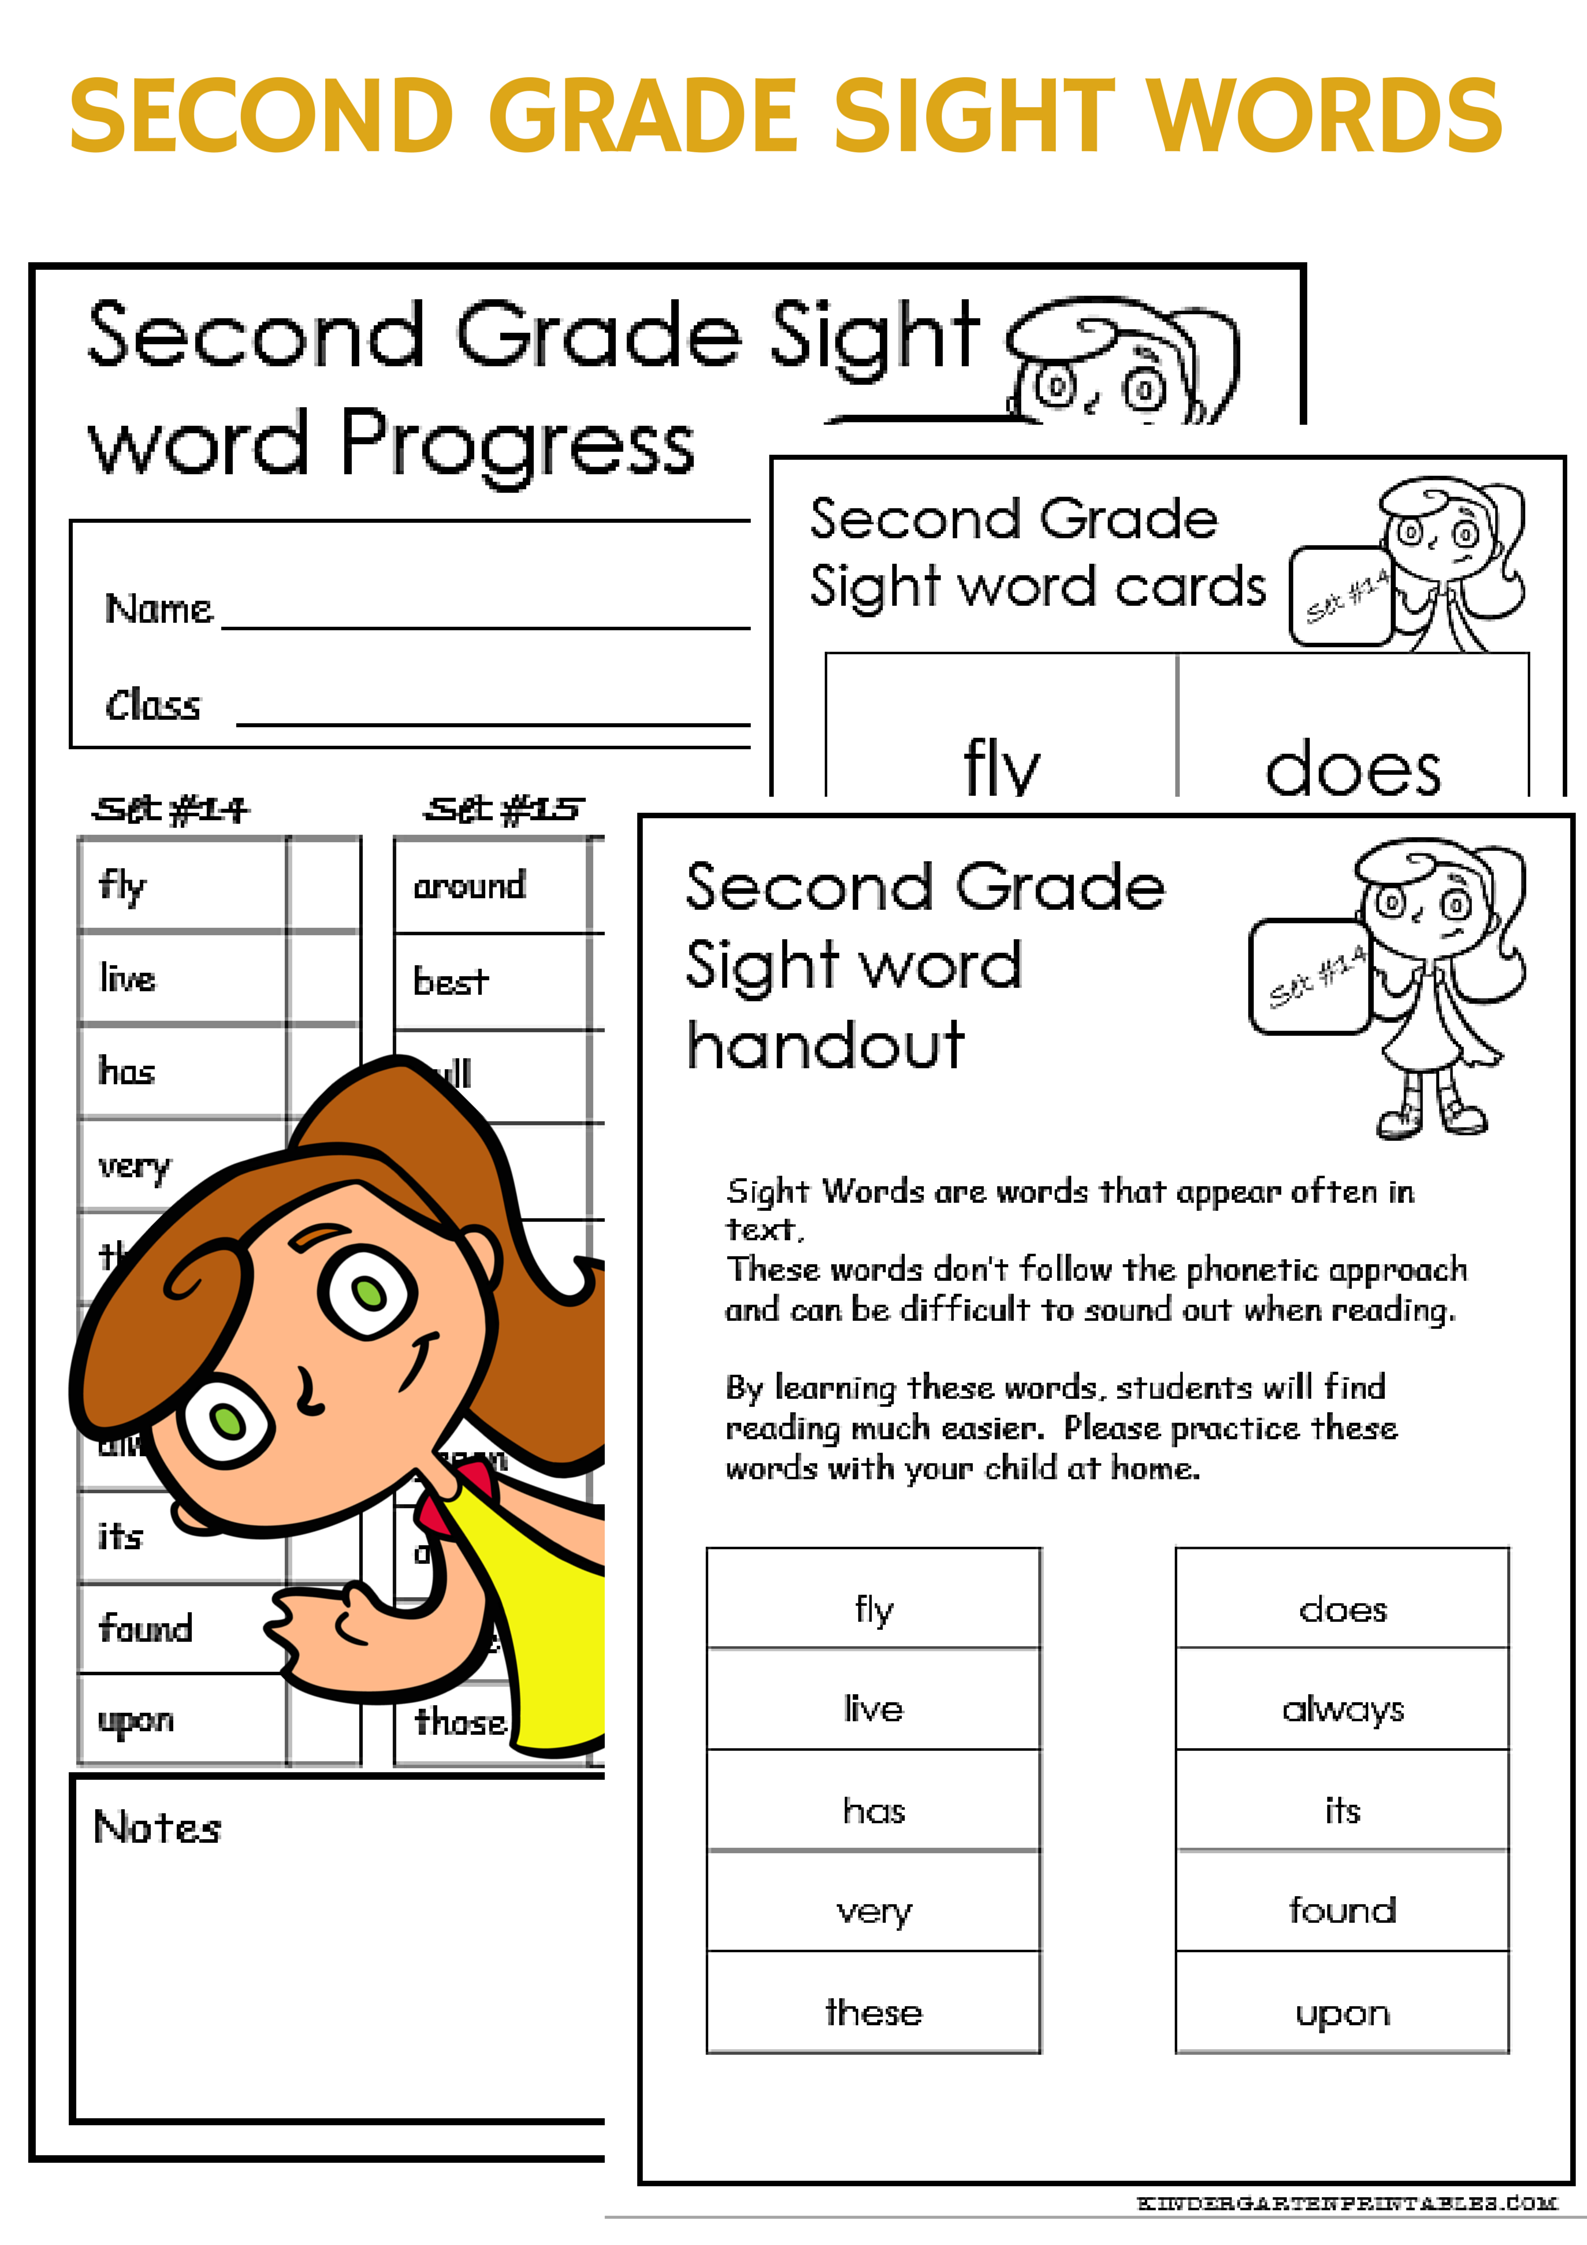 free-printable-2nd-grade-sight-words